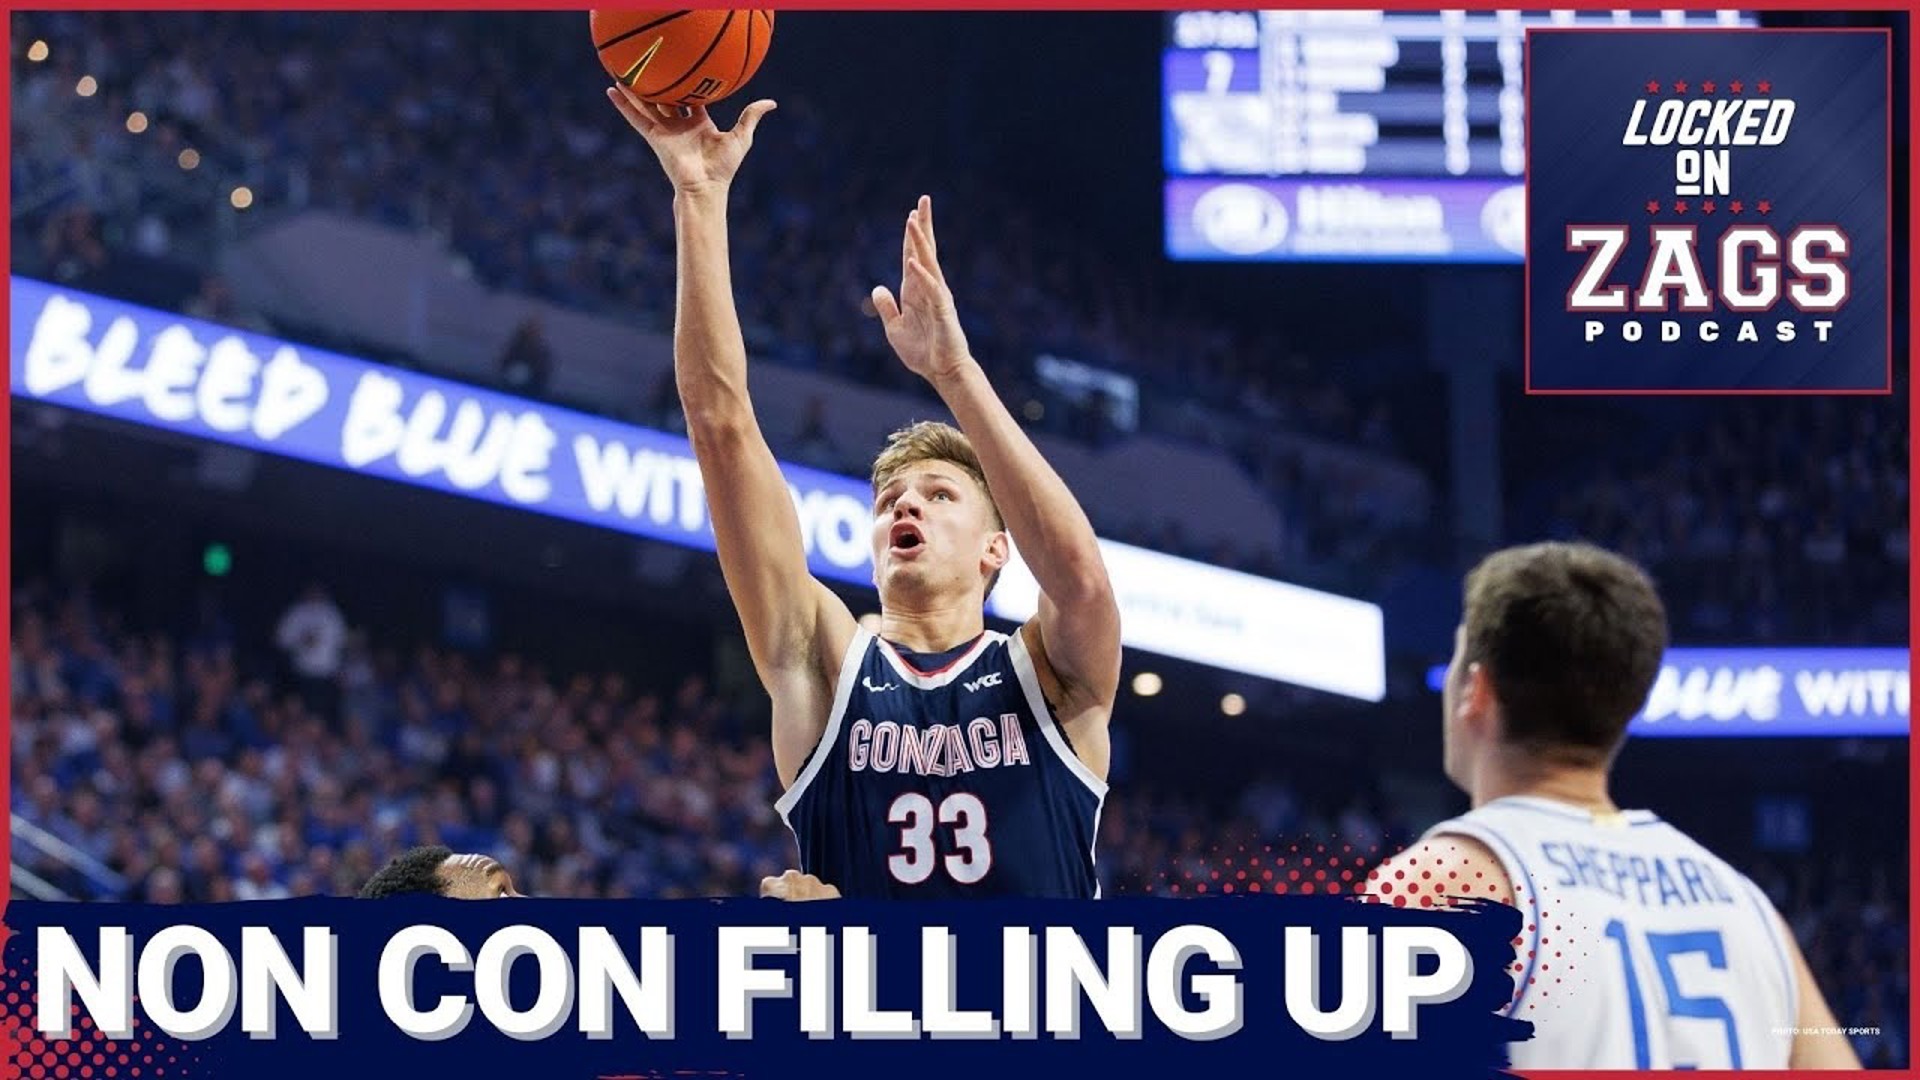 Mark Few and the Gonzaga Bulldogs will face Nicholls State out of the Southland in late December as part of the non-conference schedule.